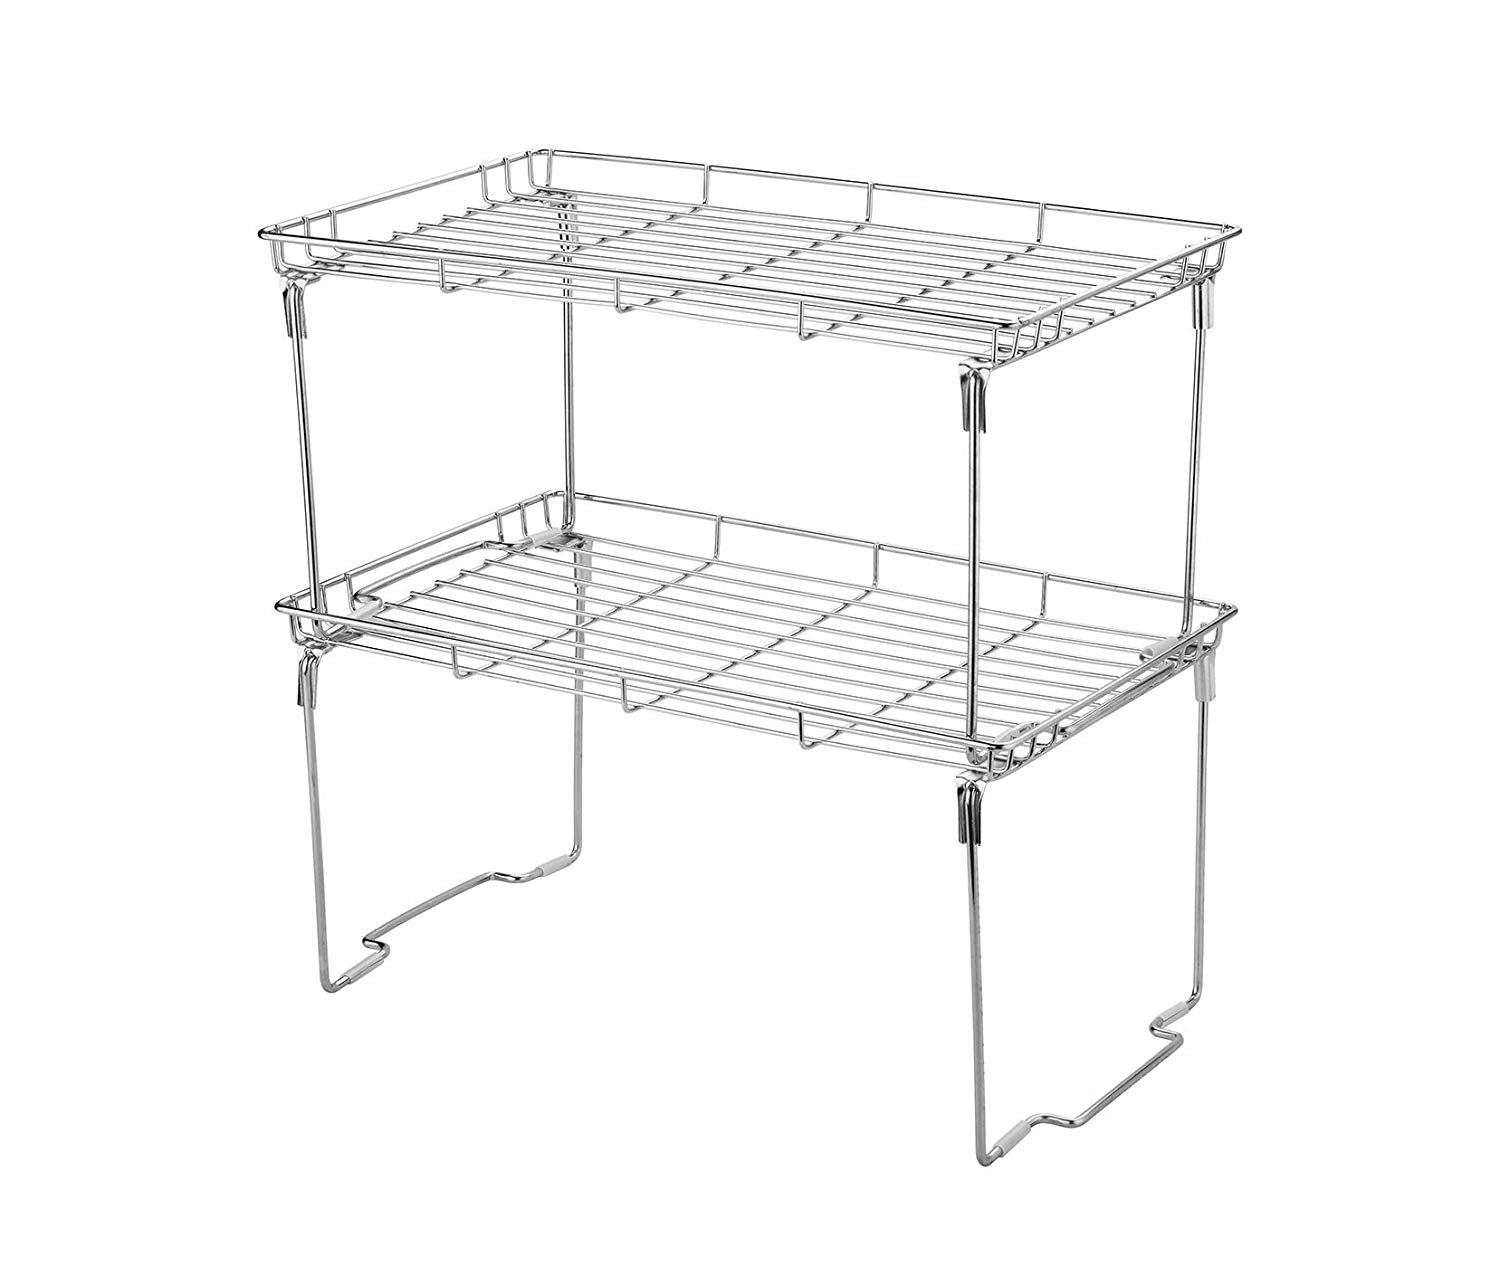 Stackable and Foldable Kitchen Shelf Organizer 15"L x 9"W x 7.5"H (Pack of 2, Chrome)